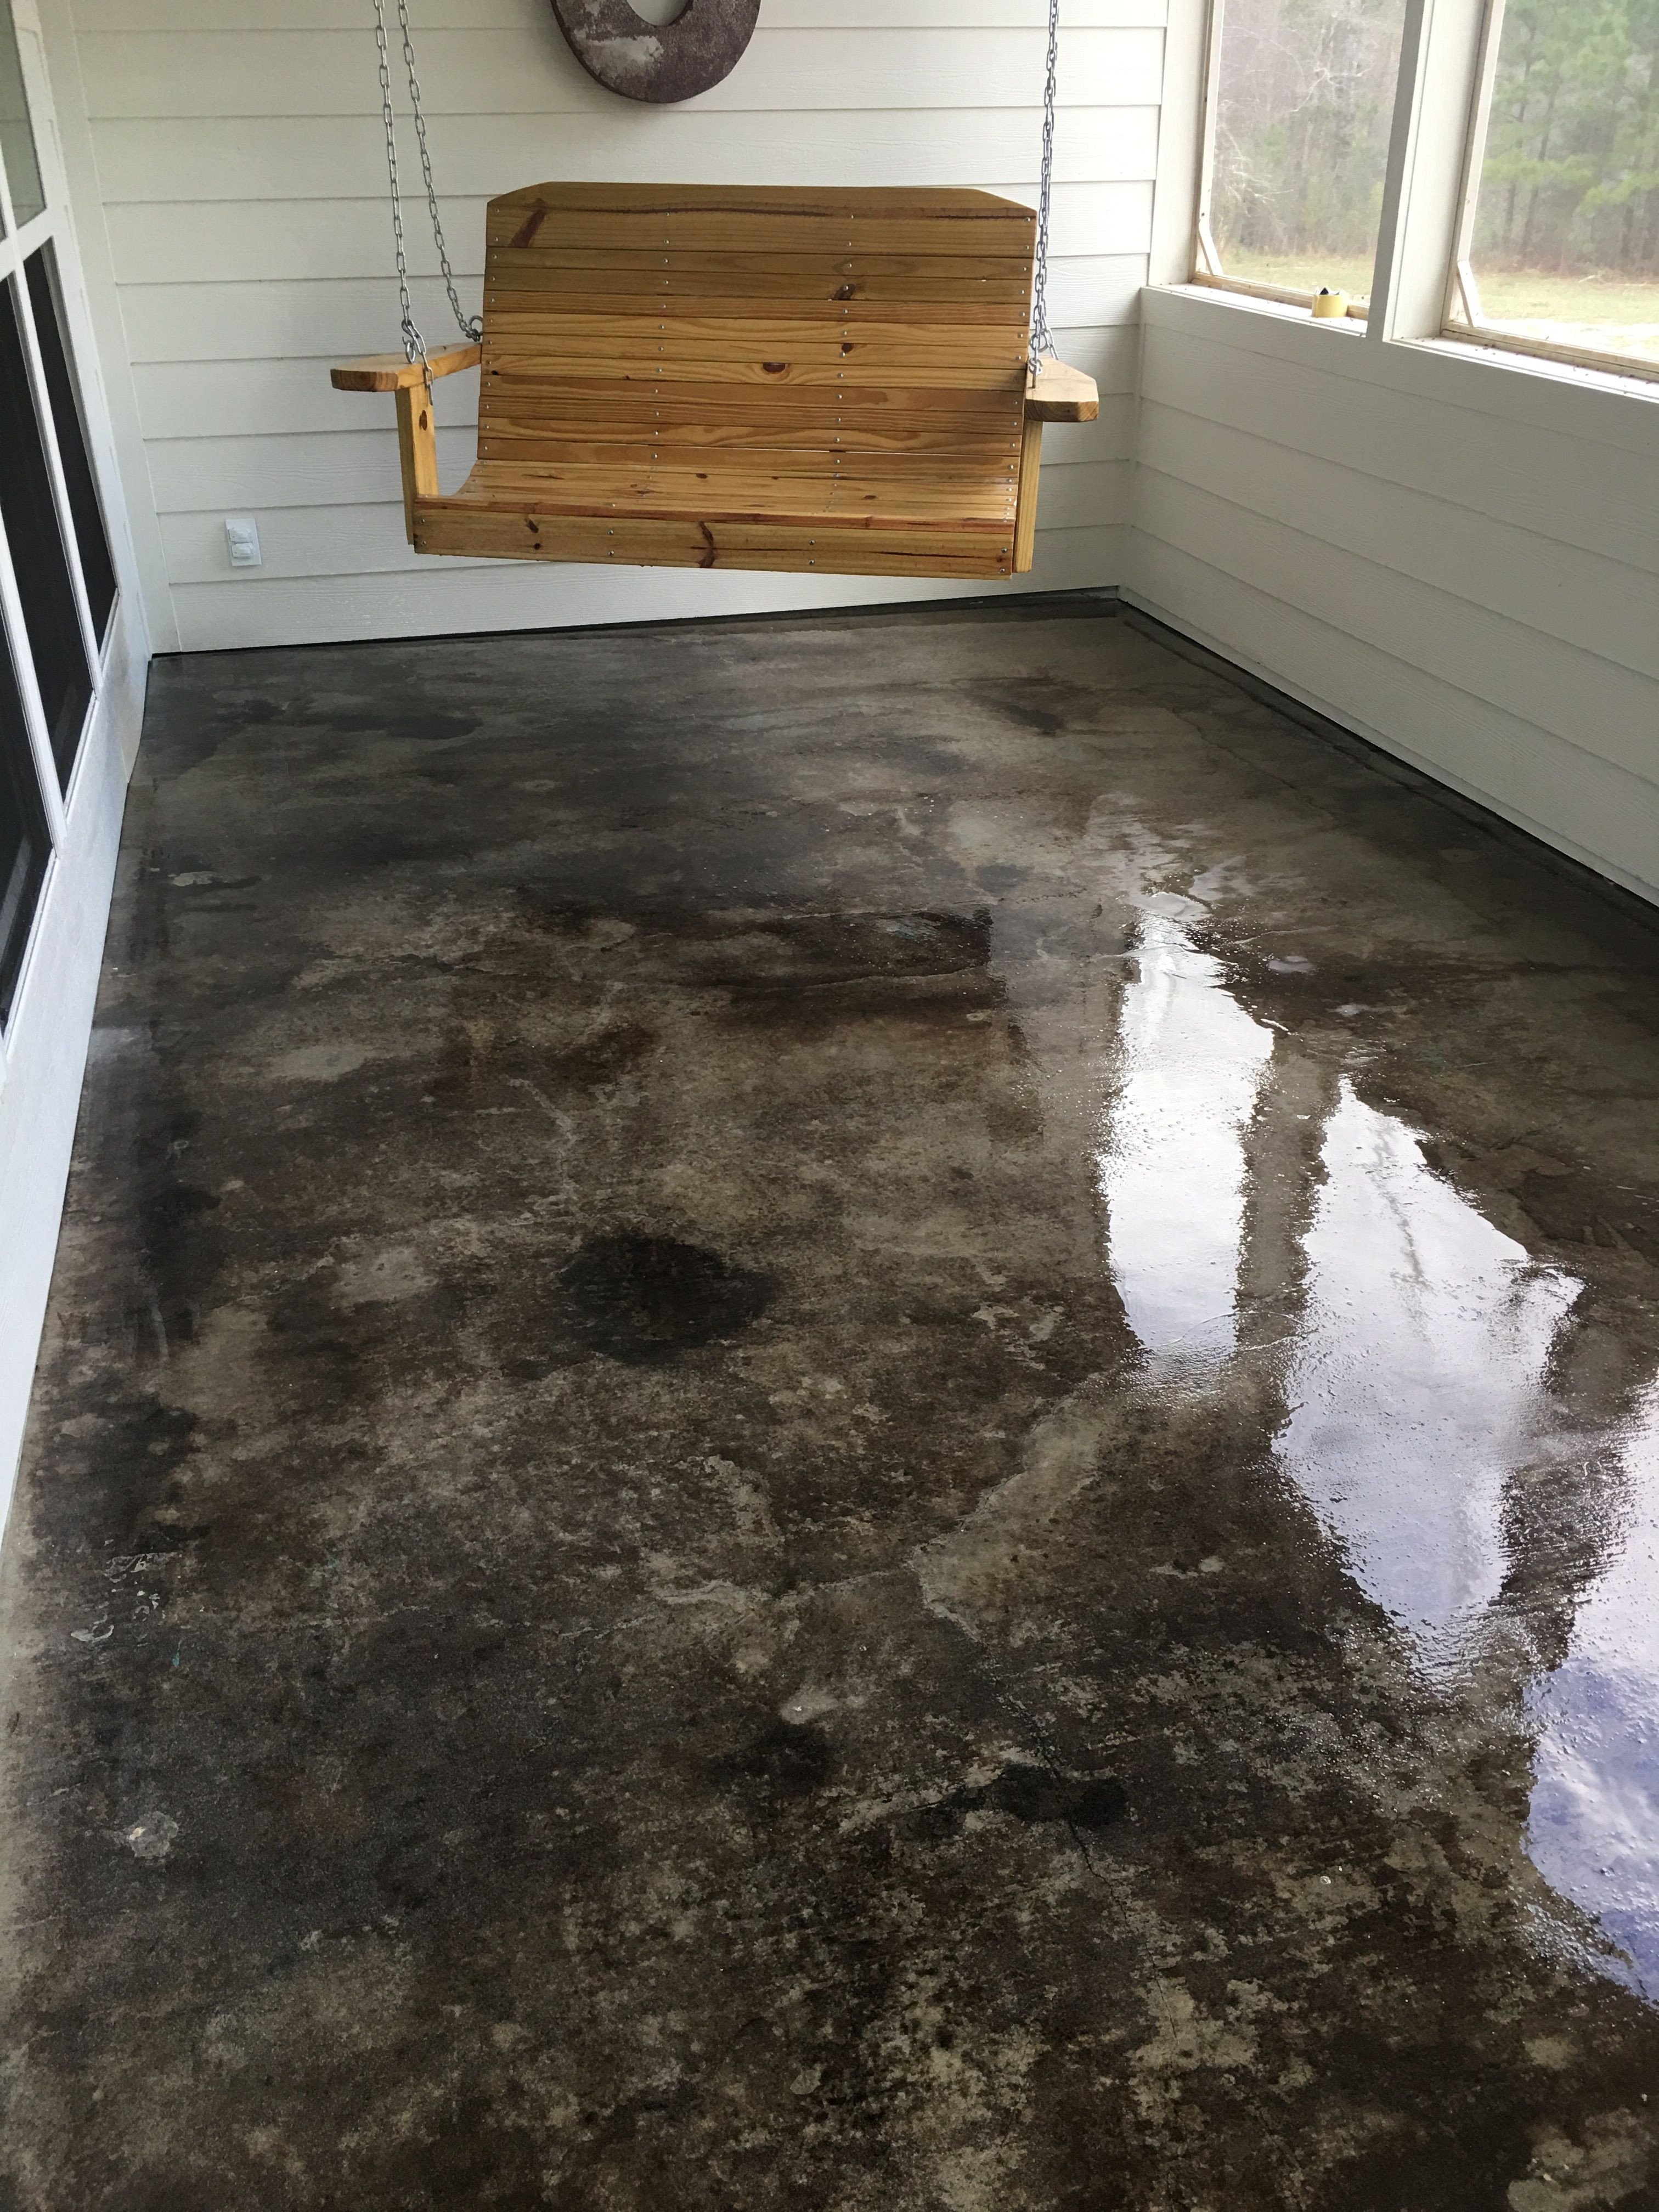 how to install hardwood floor in basement of gray acid stained concrete porch basement floor pinterest in gray acid stained concrete porch porch flooring diy flooring basement flooring basement remodeling